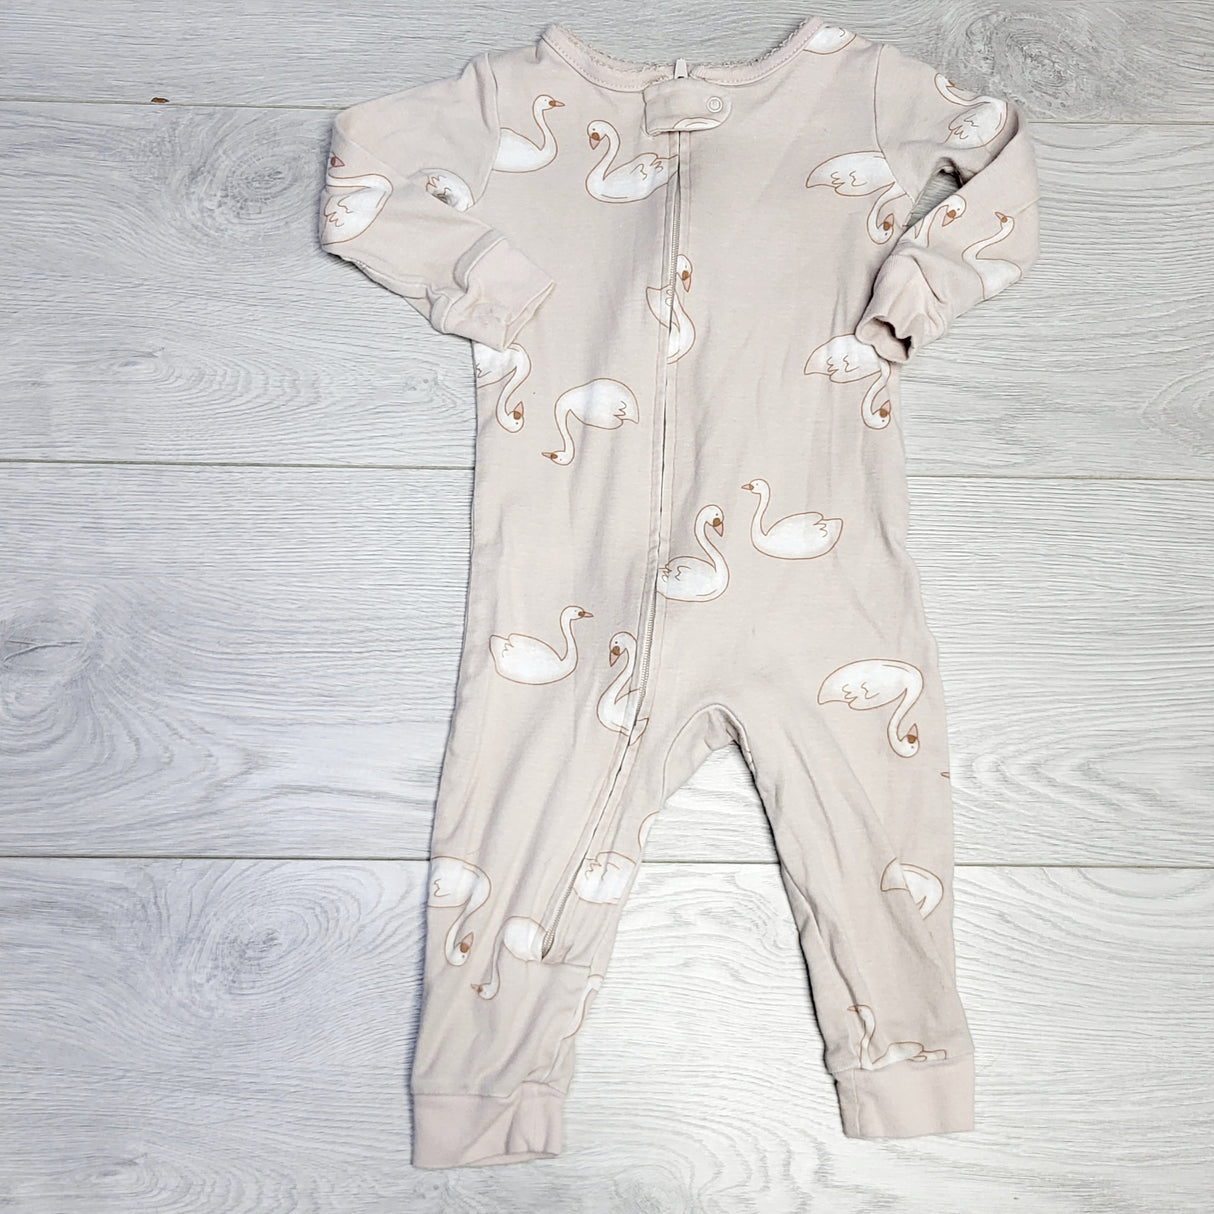 CRTH1 - Carters zippered cotton sleeper with swans. Size 12 months